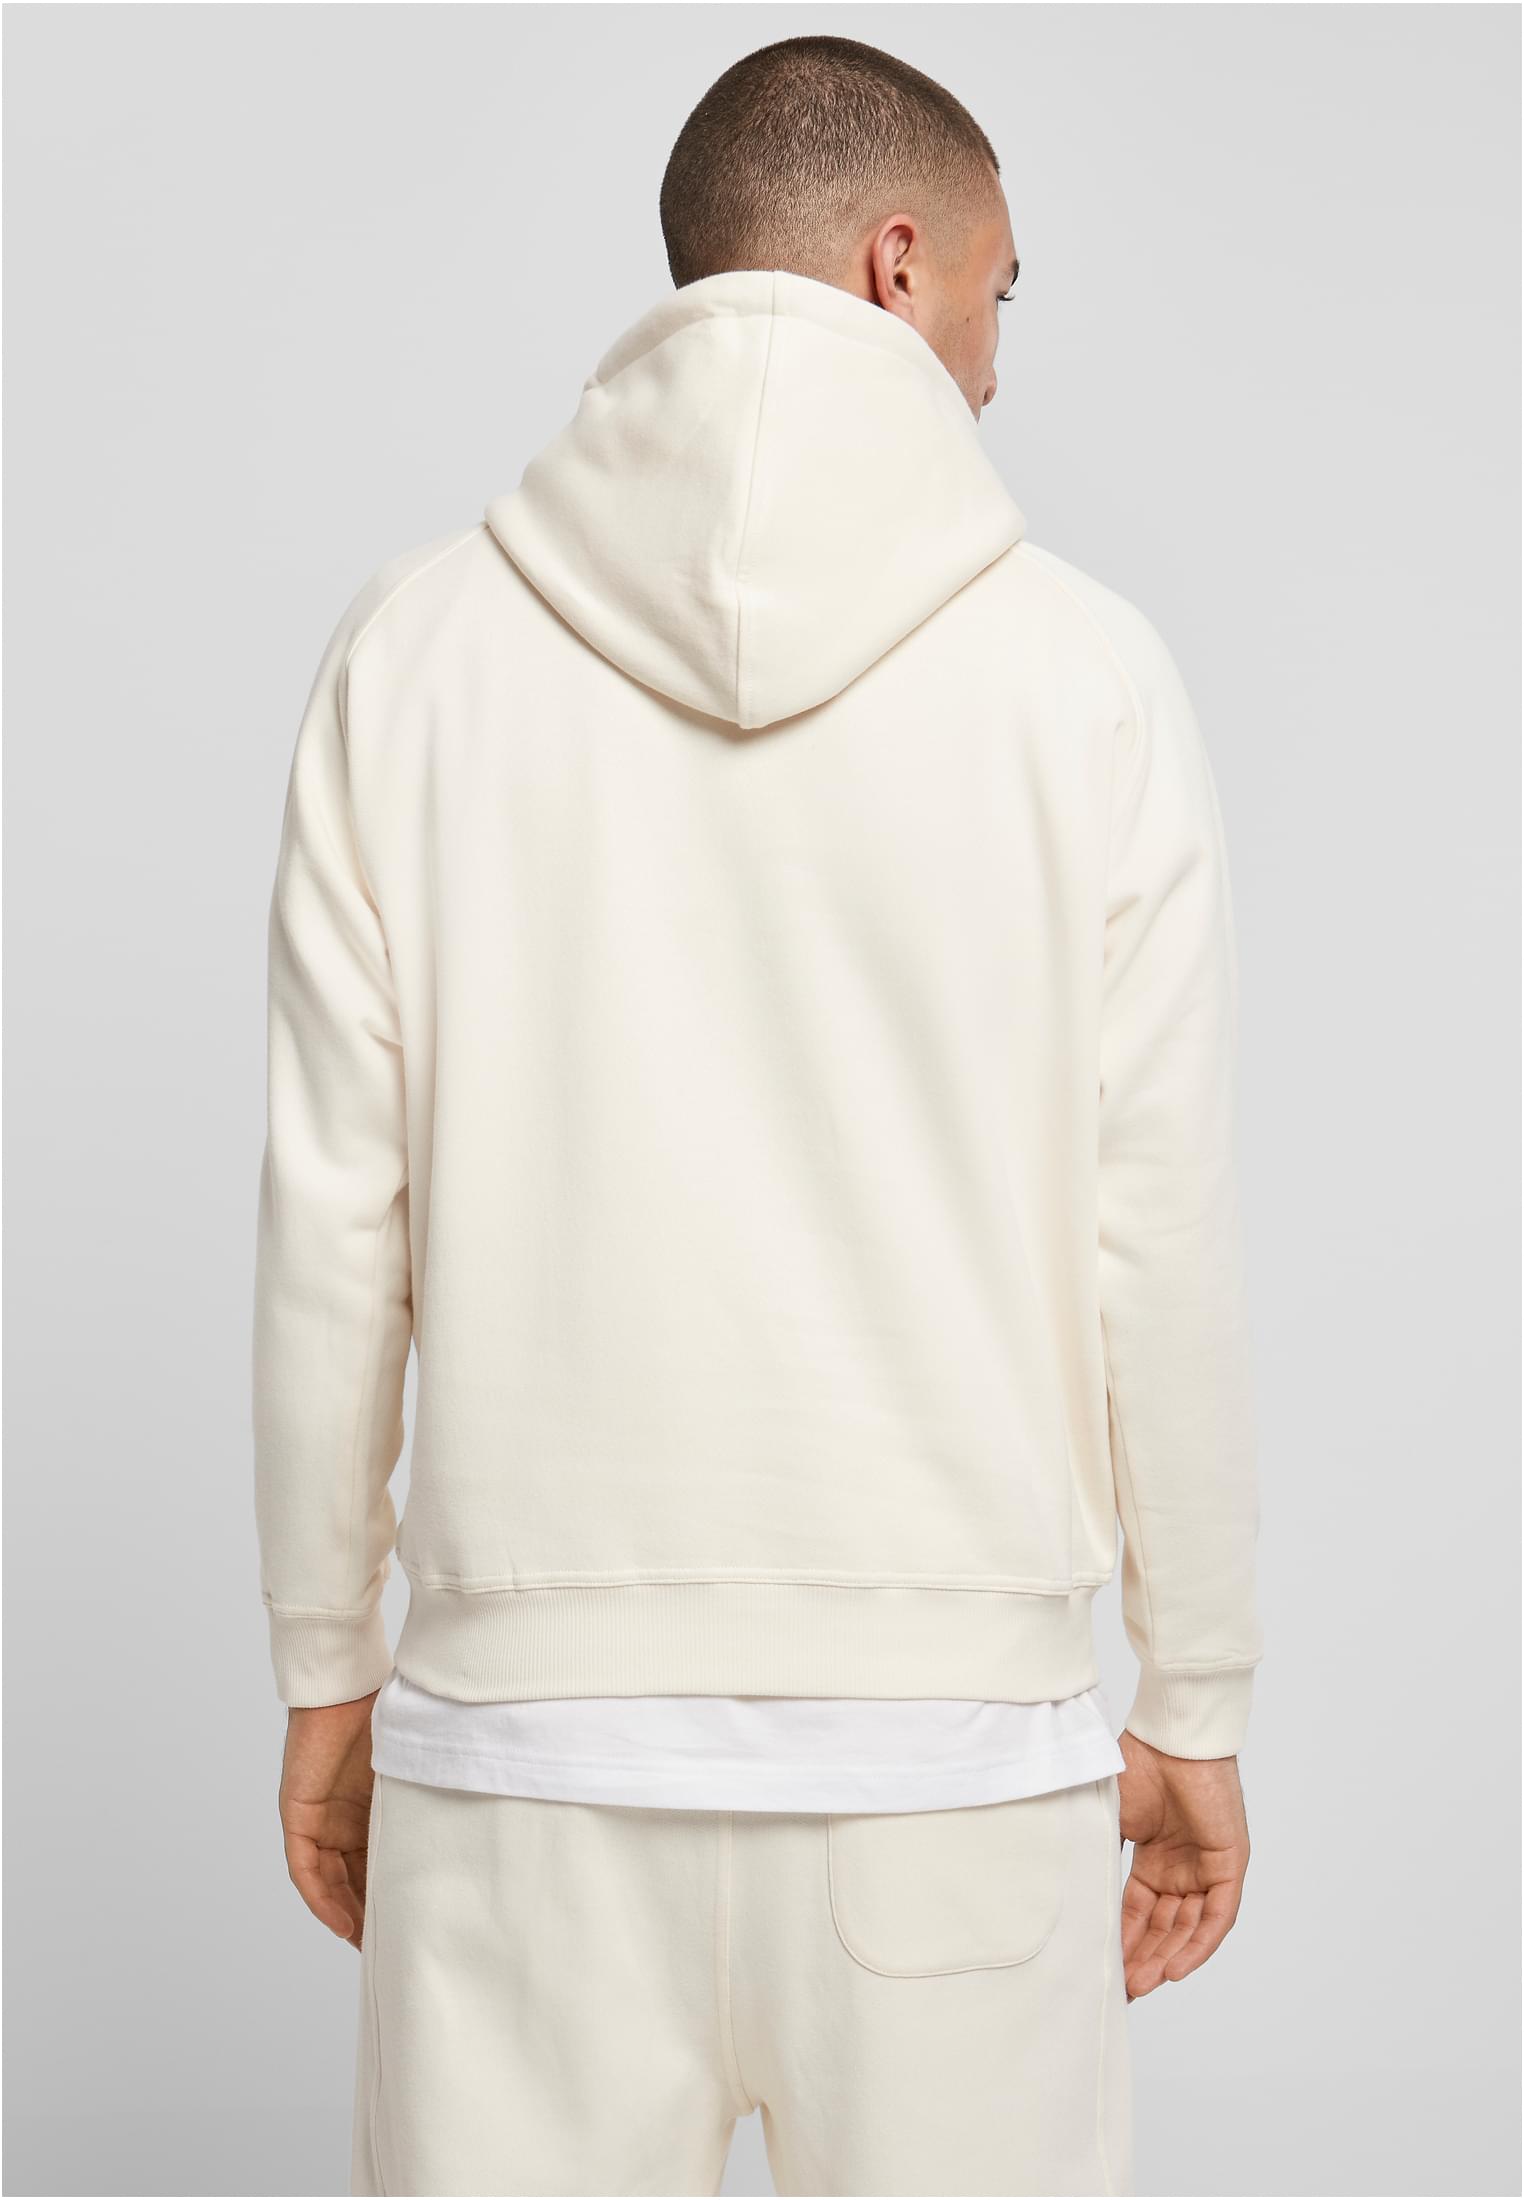 Plus Size Blank Hoody in Farbe whitesand